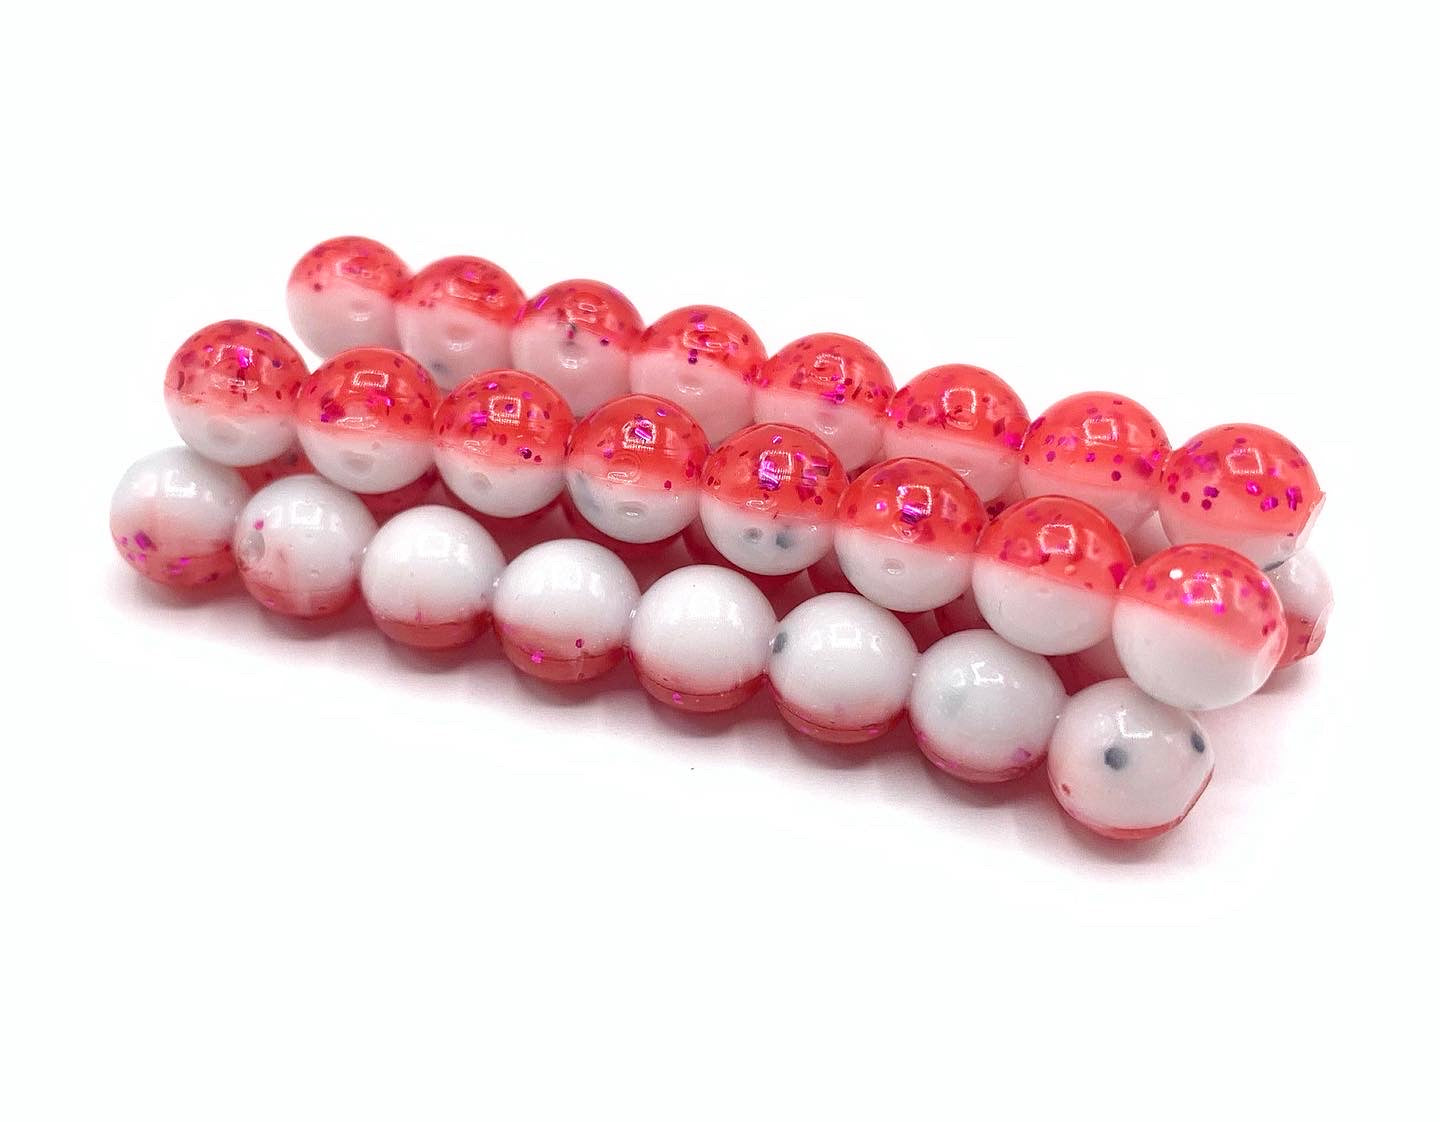 Generic 50pcs/pack 8mm Soft Rubber Beads Carp Fishing Bore @ Best Price  Online